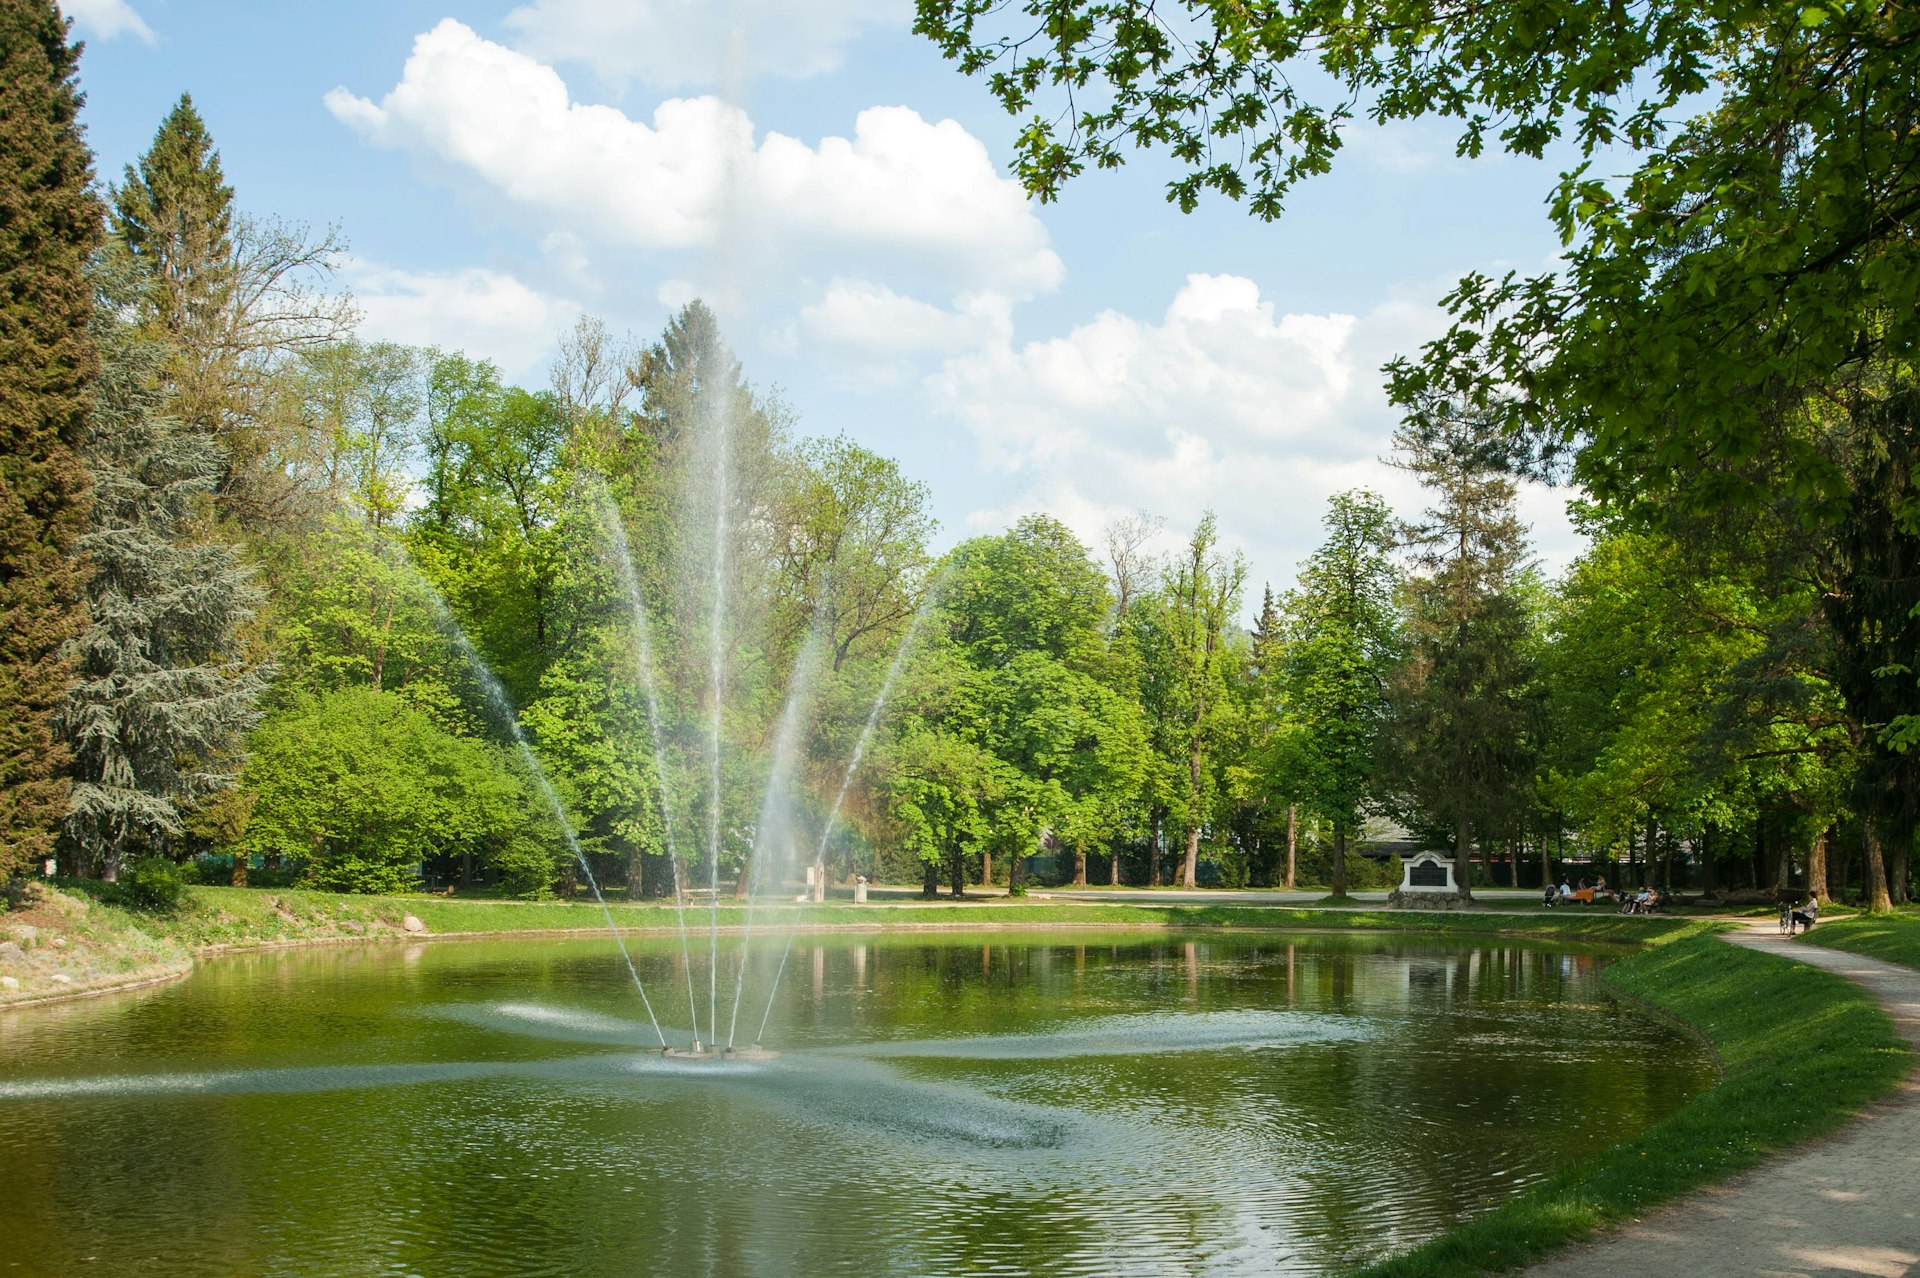 A fountain spraying water into the air in the middle of a pond in Volksgarten park in Salzburg